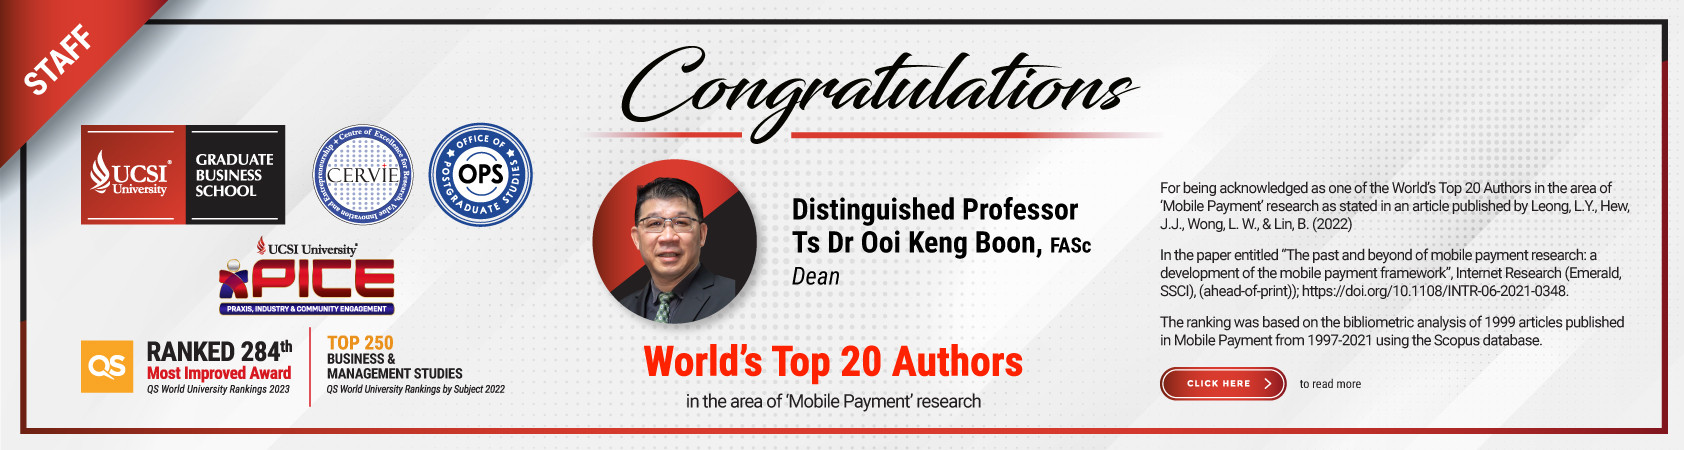 Distinguished Professor Ooi Acknowledged One of the World’s Most Prolific Researchers in Mobile Payment Research